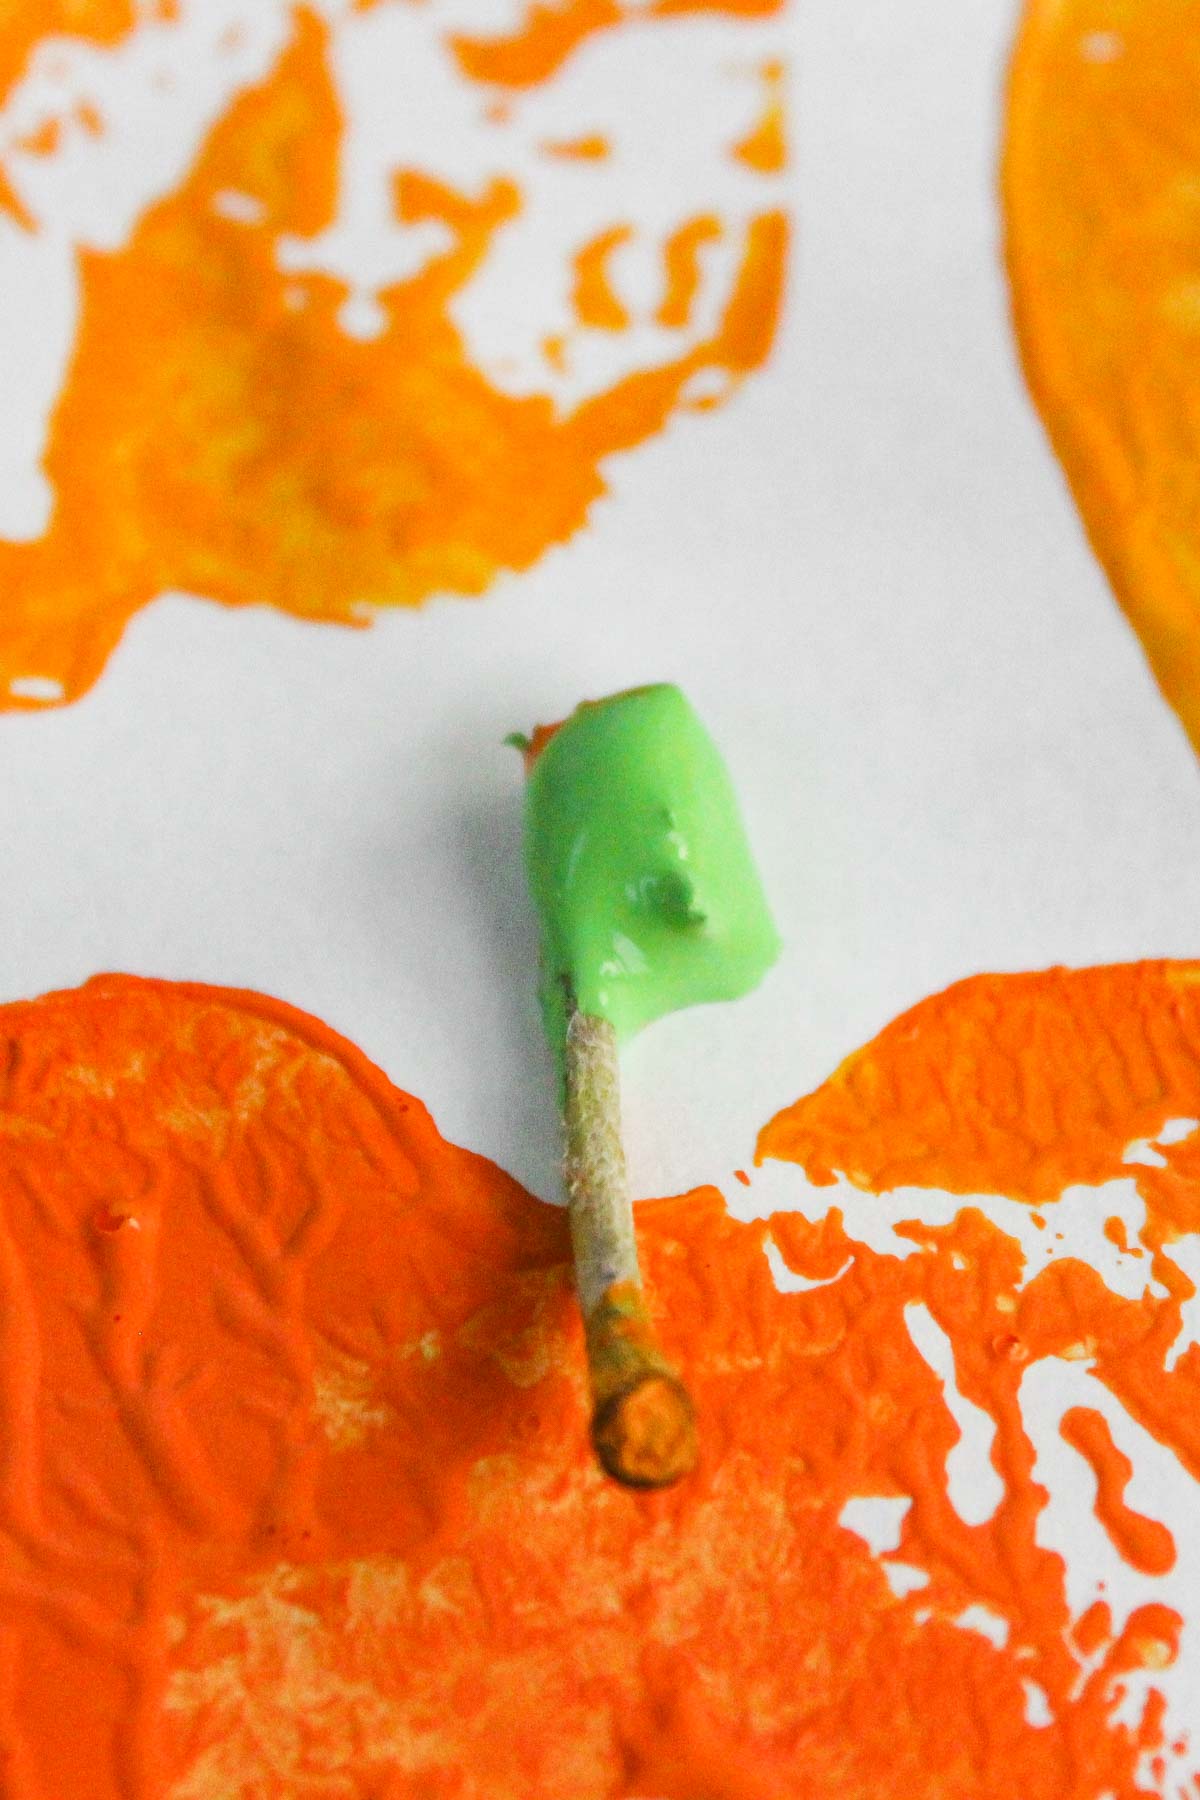 using an apple stem to paint